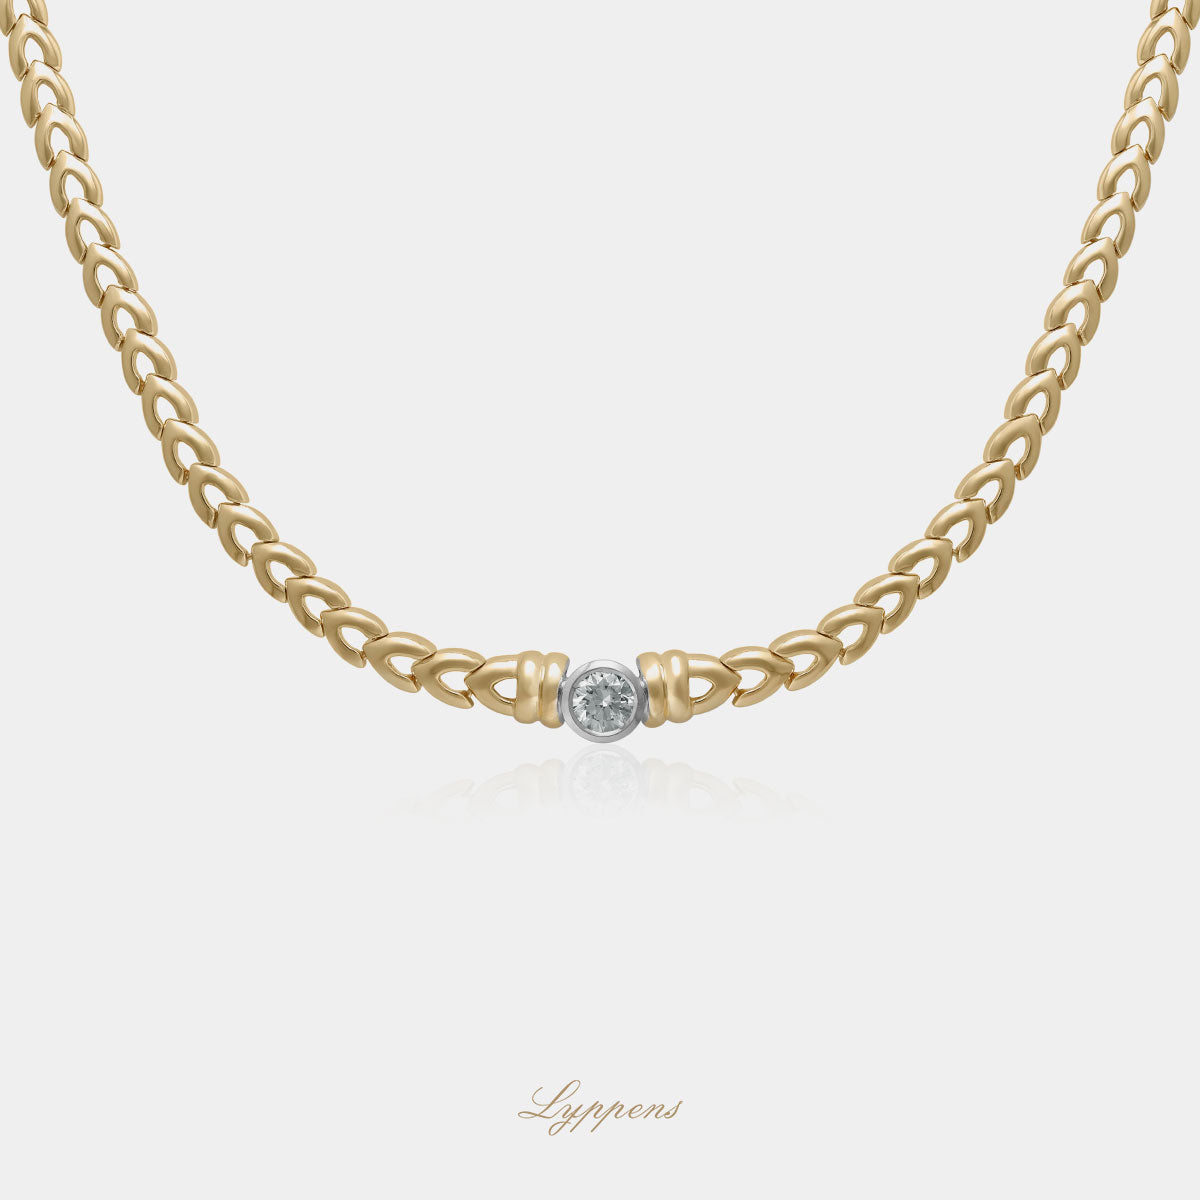 Yellow and white gold vintage necklace with diamond